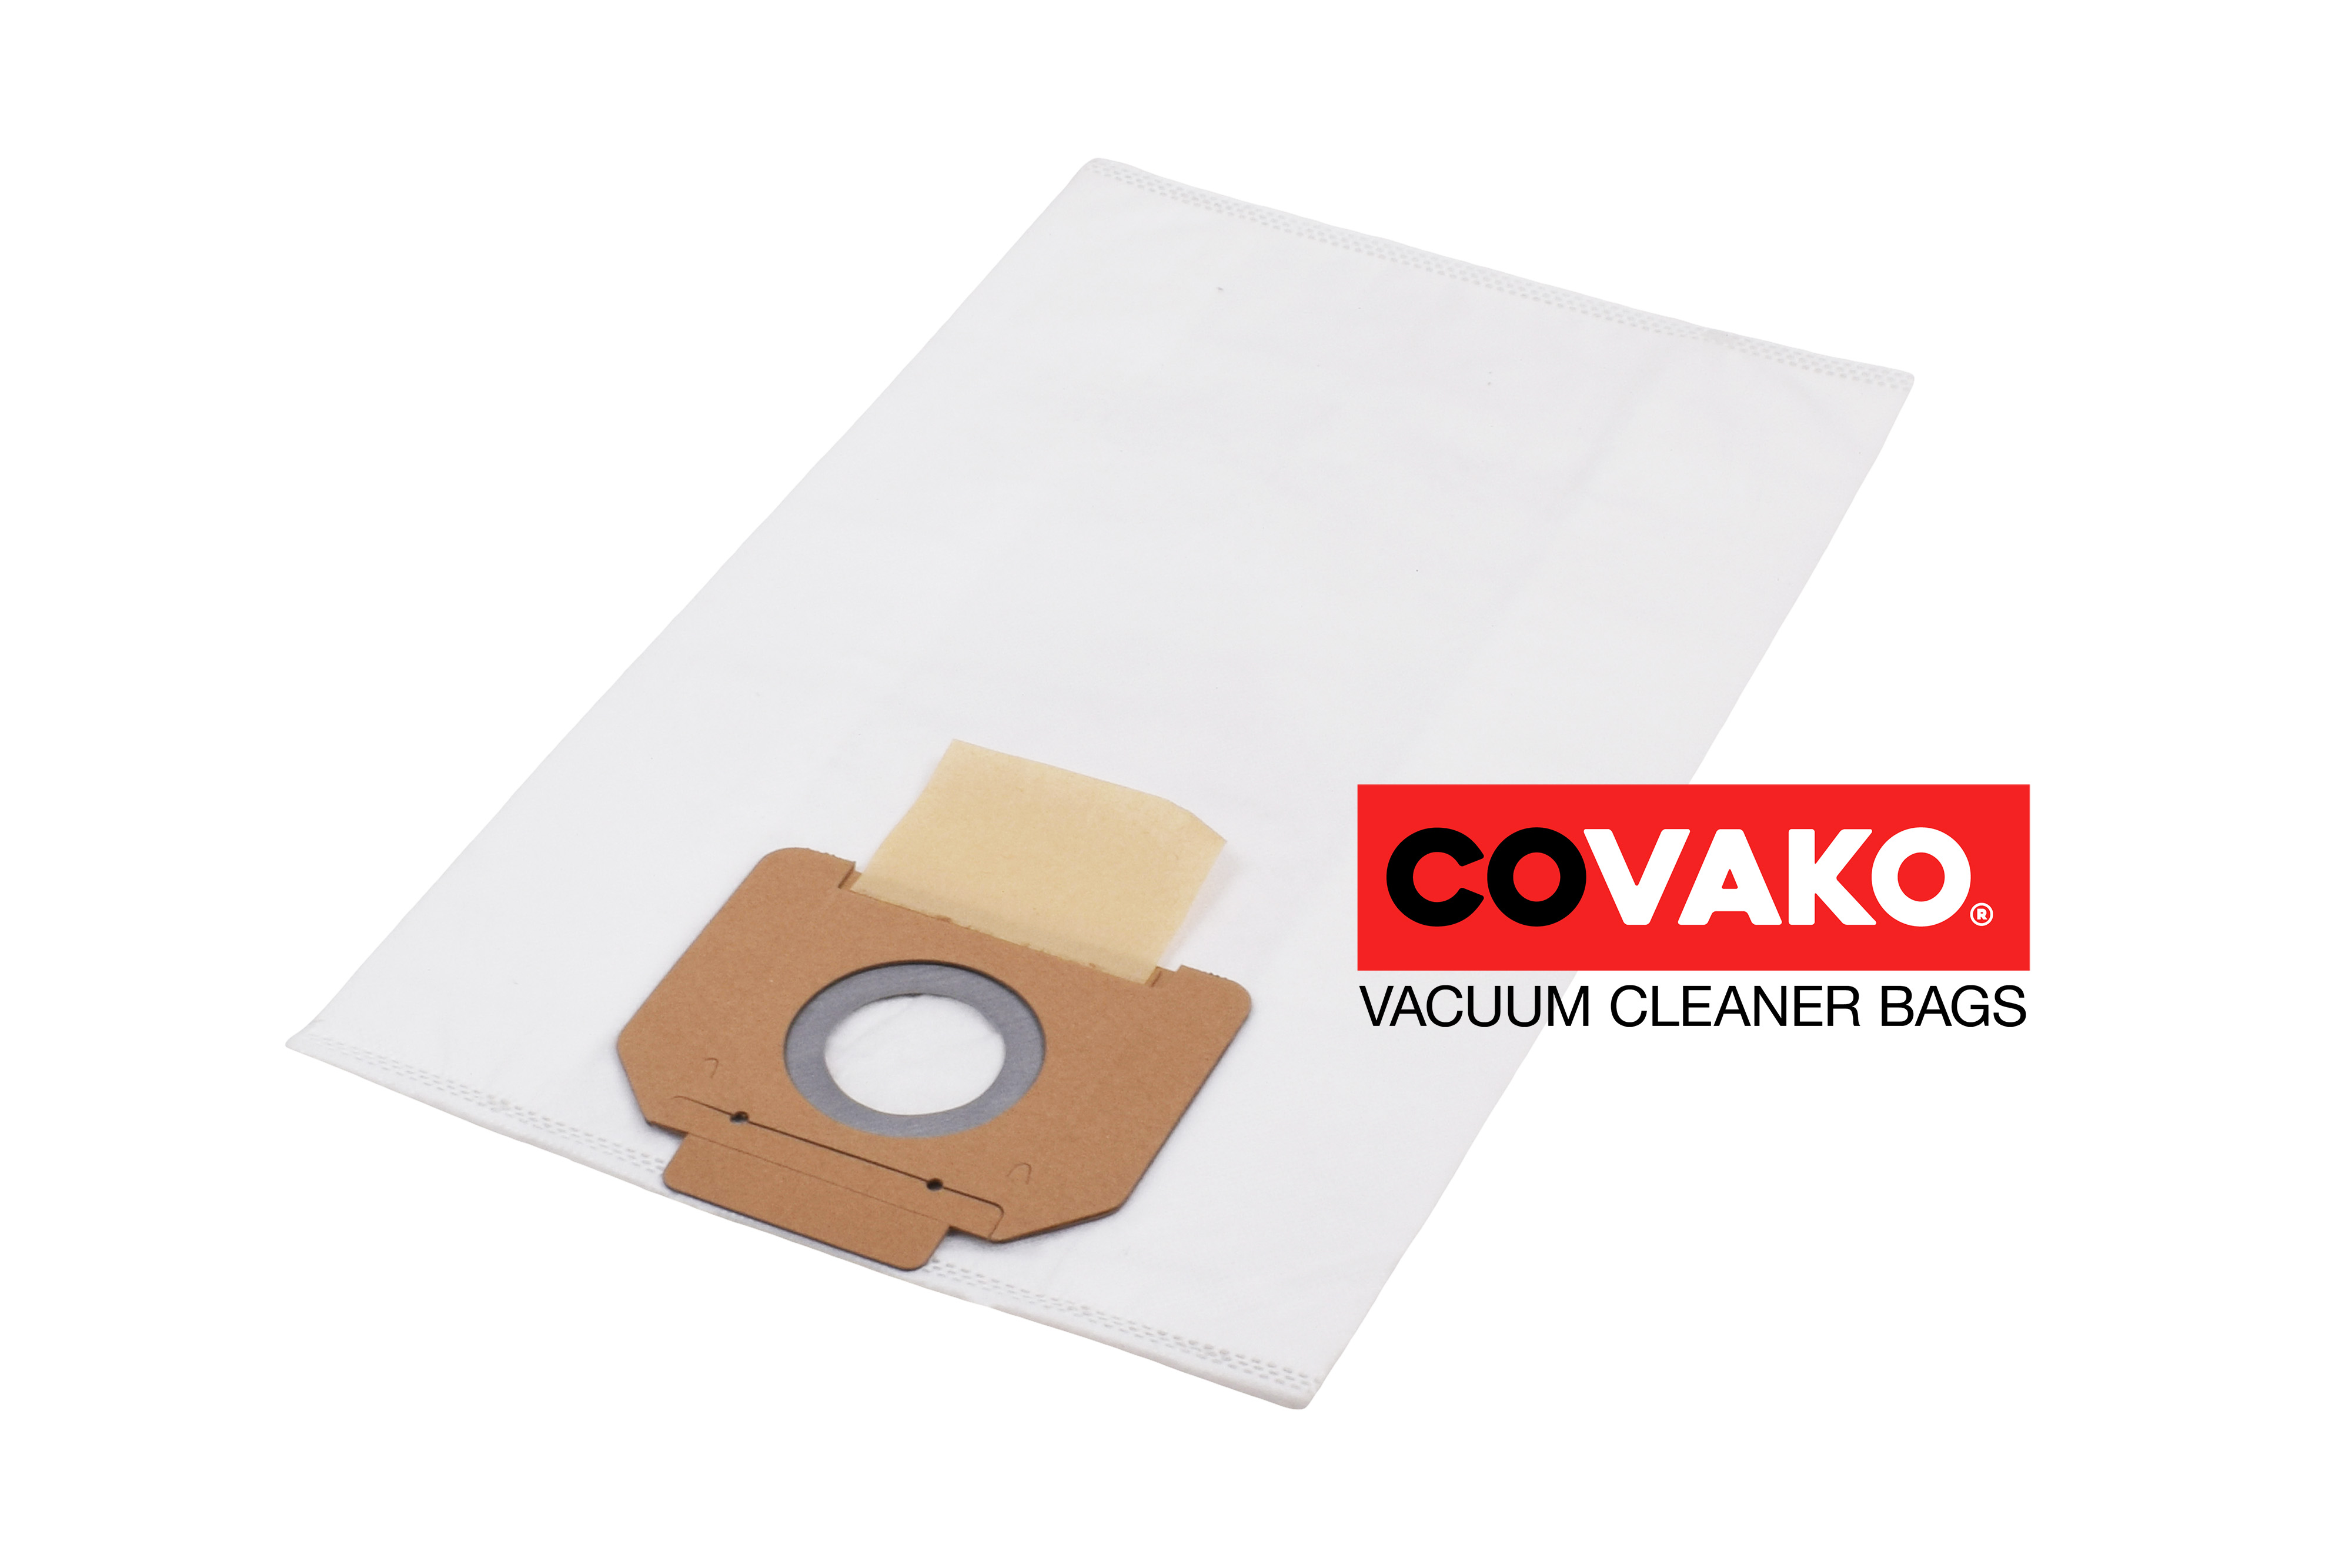 IPC Jet T 117 / Synthesis - IPC vacuum cleaner bags